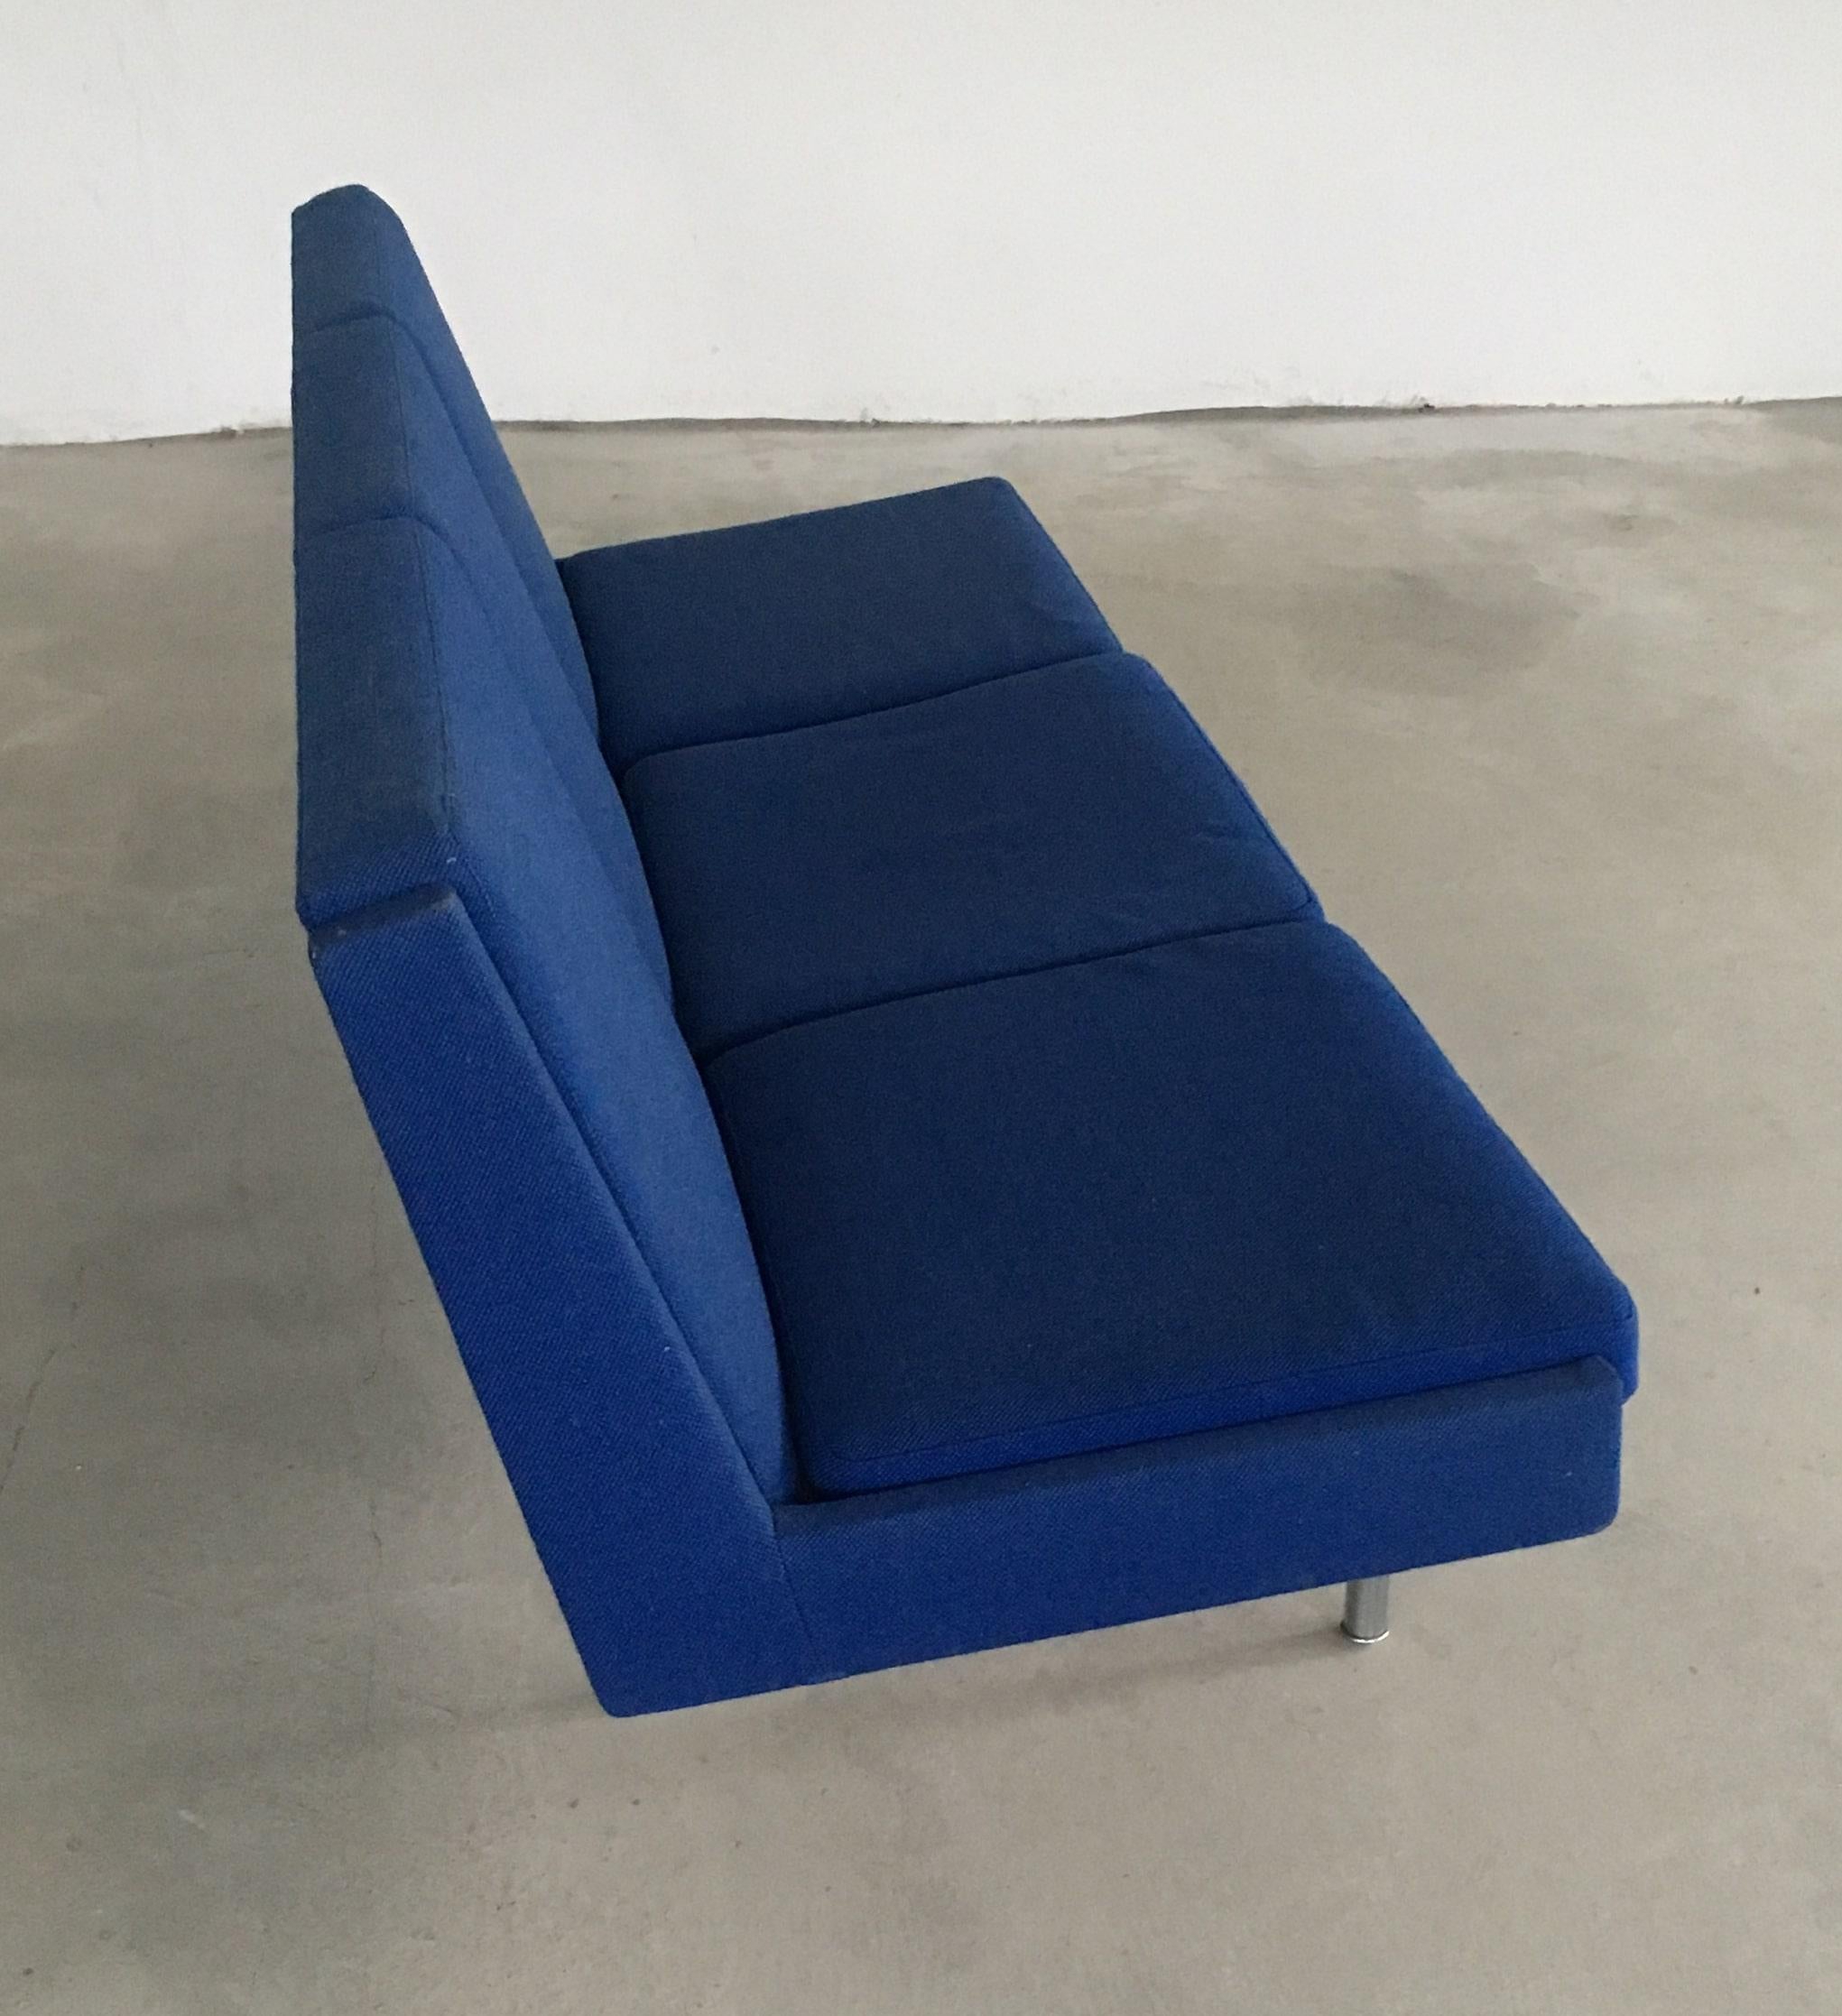 1960s Hans J. Wegner Airport Sofa in Original Blue Fabric by A.P. Stolen In Good Condition For Sale In Knebel, DK